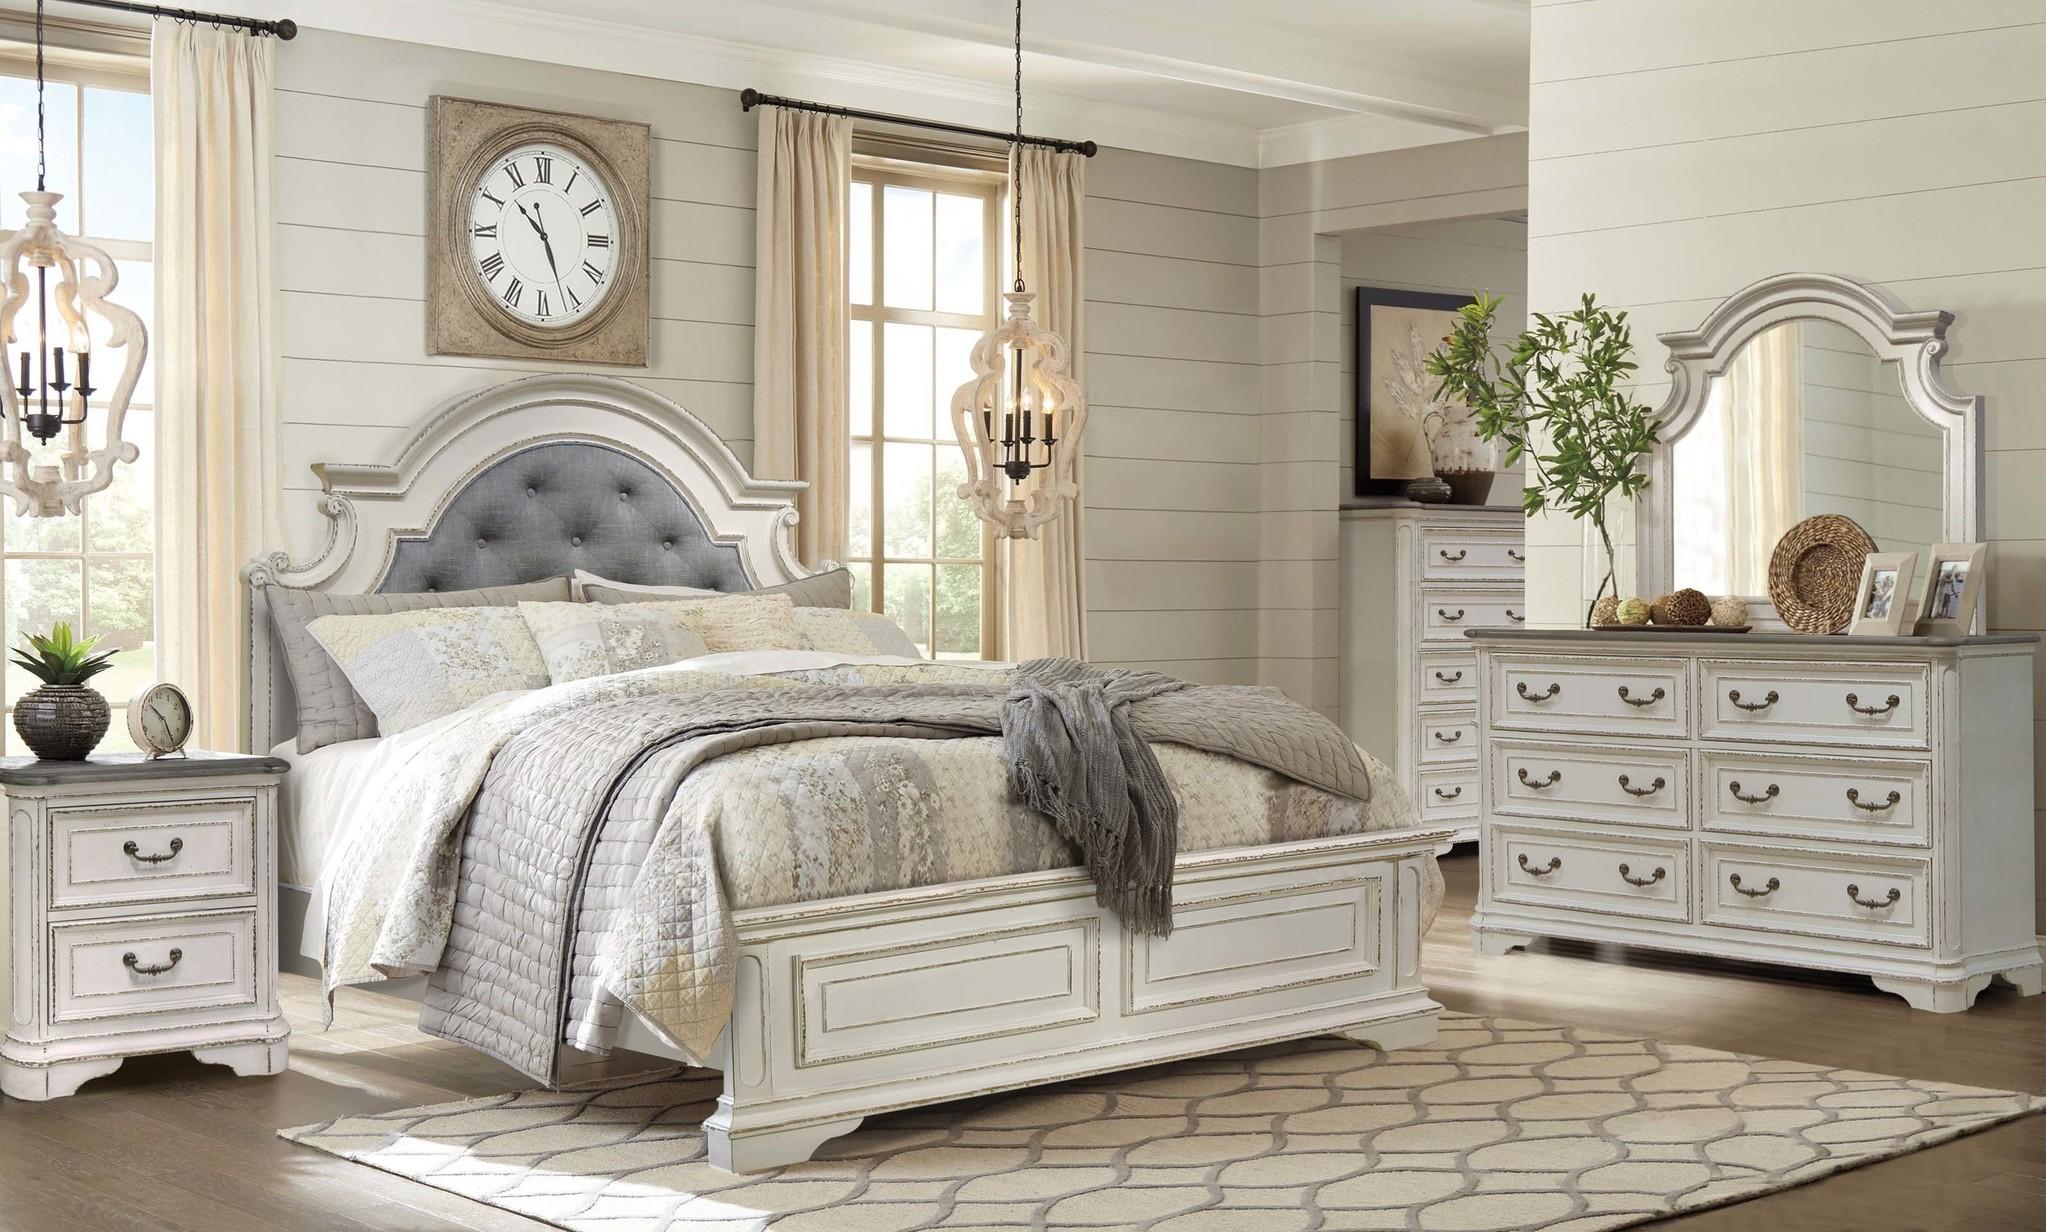 

    
Country Distressed Whitewash Upholstered Queen Bedroom Set 4Pcs McFerran B738
